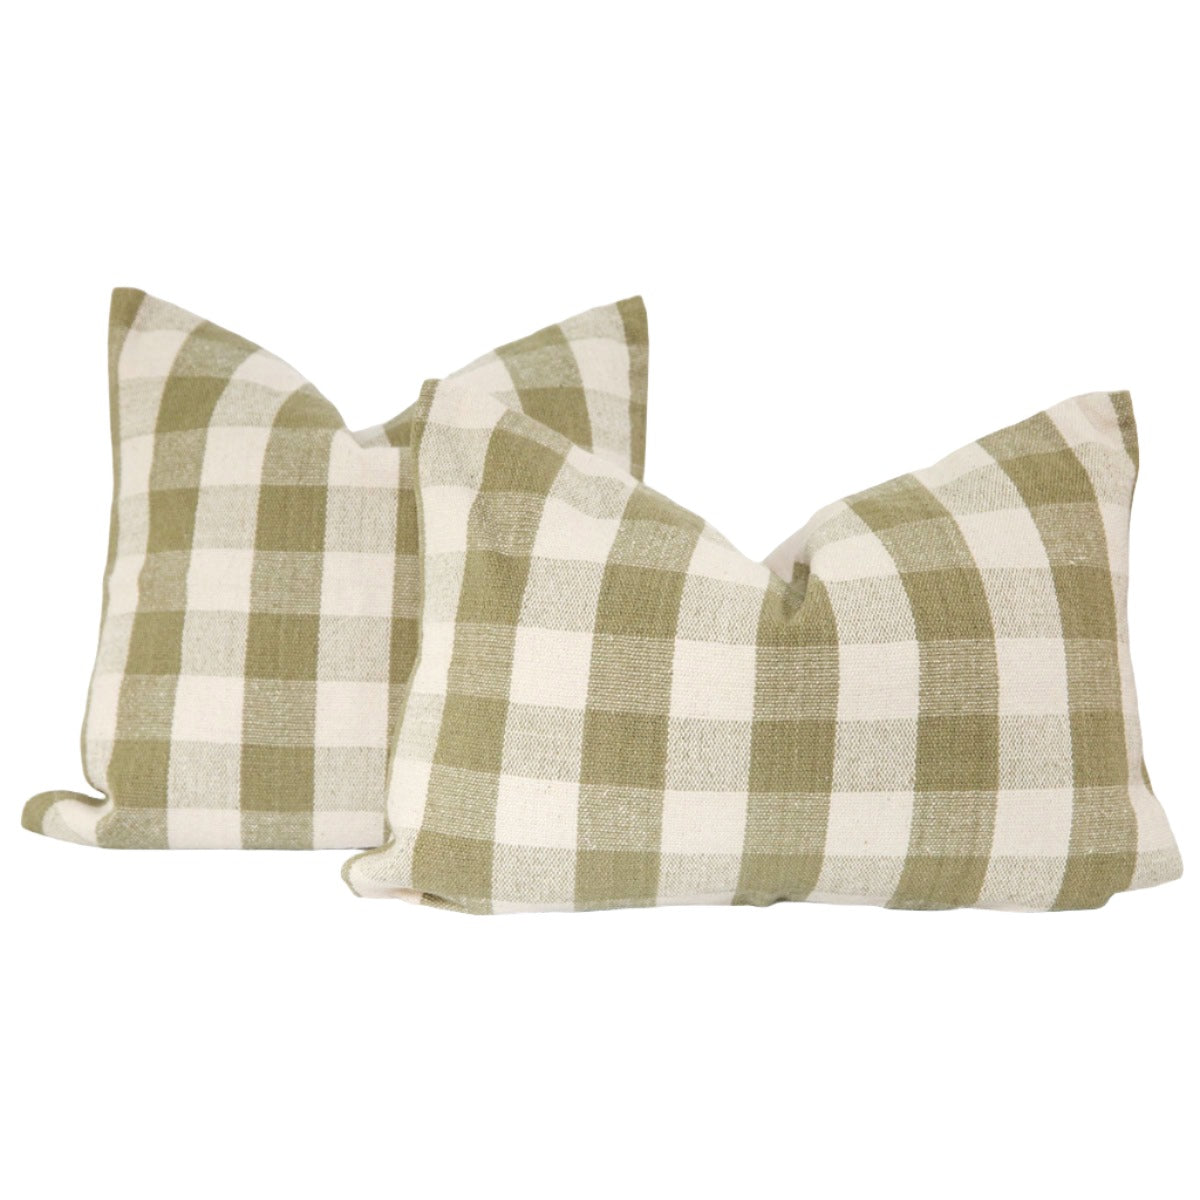 Signature Woven Olive Green Gingham Pillow Cover